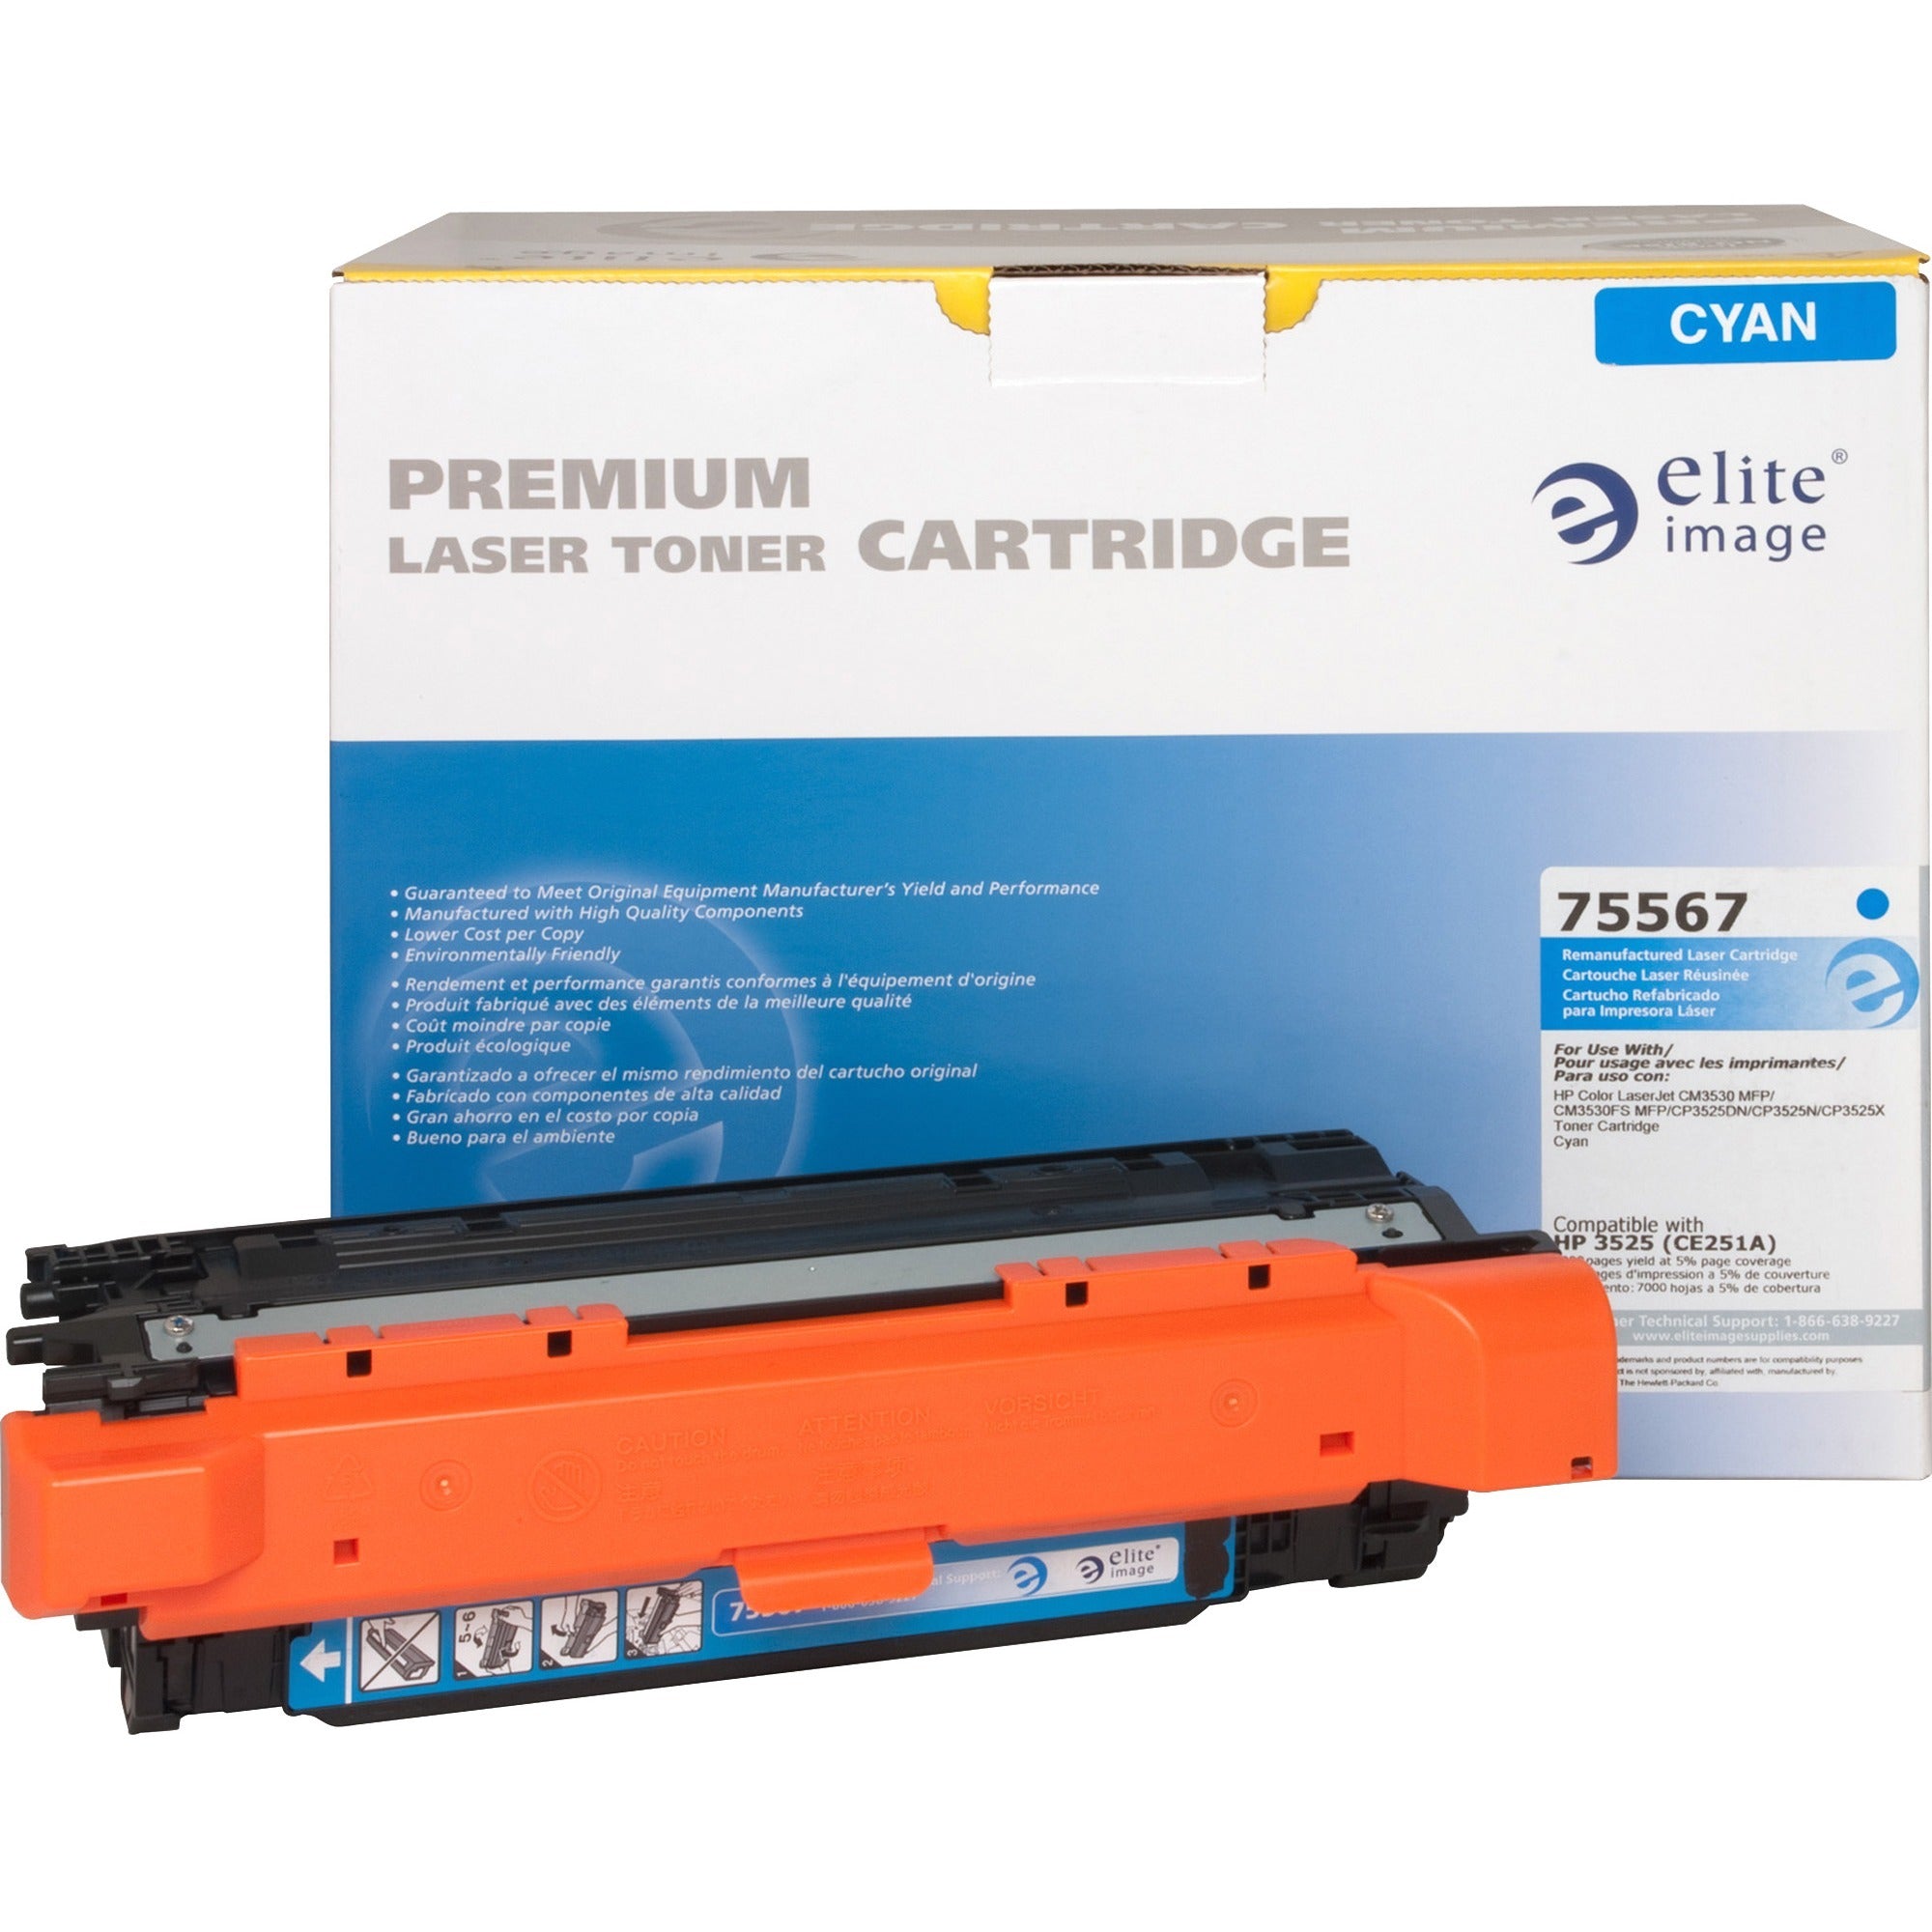 Elite Image Remanufactured Laser Toner Cartridge - Alternative for HP 504A (CE251A) - Cyan - 1 Each - 7000 Pages - 1